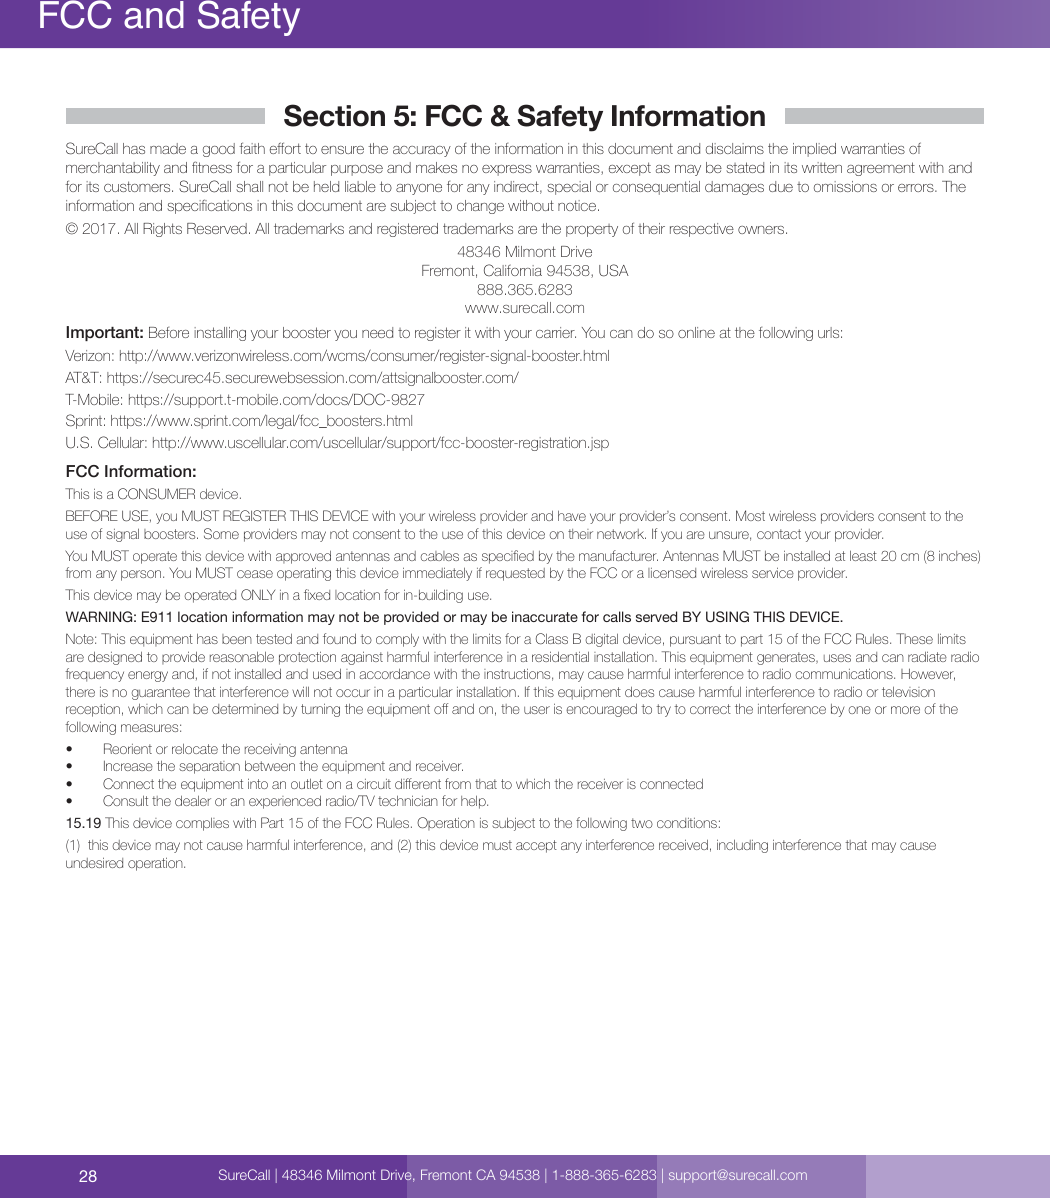 28FCC and SafetySureCall | 48346 Milmont Drive, Fremont CA 94538 | 1-888-365-6283 | support@surecall.comSection 5: FCC &amp; Safety InformationSureCall has made a good faith eort to ensure the accuracy of the information in this document and disclaims the implied warranties of merchantability and tness for a particular purpose and makes no express warranties, except as may be stated in its written agreement with and for its customers. SureCall shall not be held liable to anyone for any indirect, special or consequential damages due to omissions or errors. The information and specications in this document are subject to change without notice. © 2017. All Rights Reserved. All trademarks and registered trademarks are the property of their respective owners.48346 Milmont DriveFremont, California 94538, USA888.365.6283www.surecall.comImportant: Before installing your booster you need to register it with your carrier. You can do so online at the following urls:Verizon: http://www.verizonwireless.com/wcms/consumer/register-signal-booster.htmlAT&amp;T: https://securec45.securewebsession.com/attsignalbooster.com/T-Mobile: https://support.t-mobile.com/docs/DOC-9827 Sprint: https://www.sprint.com/legal/fcc_boosters.htmlU.S. Cellular: http://www.uscellular.com/uscellular/support/fcc-booster-registration.jspFCC Information:This is a CONSUMER device.BEFORE USE, you MUST REGISTER THIS DEVICE with your wireless provider and have your provider’s consent. Most wireless providers consent to the use of signal boosters. Some providers may not consent to the use of this device on their network. If you are unsure, contact your provider. You MUST operate this device with approved antennas and cables as specied by the manufacturer. Antennas MUST be installed at least 20 cm (8 inches) from any person. You MUST cease operating this device immediately if requested by the FCC or a licensed wireless service provider.This device may be operated ONLY in a xed location for in-building use.WARNING: E911 location information may not be provided or may be inaccurate for calls served BY USING THIS DEVICE.Note: This equipment has been tested and found to comply with the limits for a Class B digital device, pursuant to part 15 of the FCC Rules. These limits are designed to provide reasonable protection against harmful interference in a residential installation. This equipment generates, uses and can radiate radio frequency energy and, if not installed and used in accordance with the instructions, may cause harmful interference to radio communications. However, there is no guarantee that interference will not occur in a particular installation. If this equipment does cause harmful interference to radio or television reception, which can be determined by turning the equipment o and on, the user is encouraged to try to correct the interference by one or more of the following measures:   •  Reorient or relocate the receiving antenna•  Increase the separation between the equipment and receiver.•  Connect the equipment into an outlet on a circuit dierent from that to which the receiver is connected•  Consult the dealer or an experienced radio/TV technician for help.15.19 This device complies with Part 15 of the FCC Rules. Operation is subject to the following two conditions:  (1)  this device may not cause harmful interference, and (2) this device must accept any interference received, including interference that may cause undesired operation.